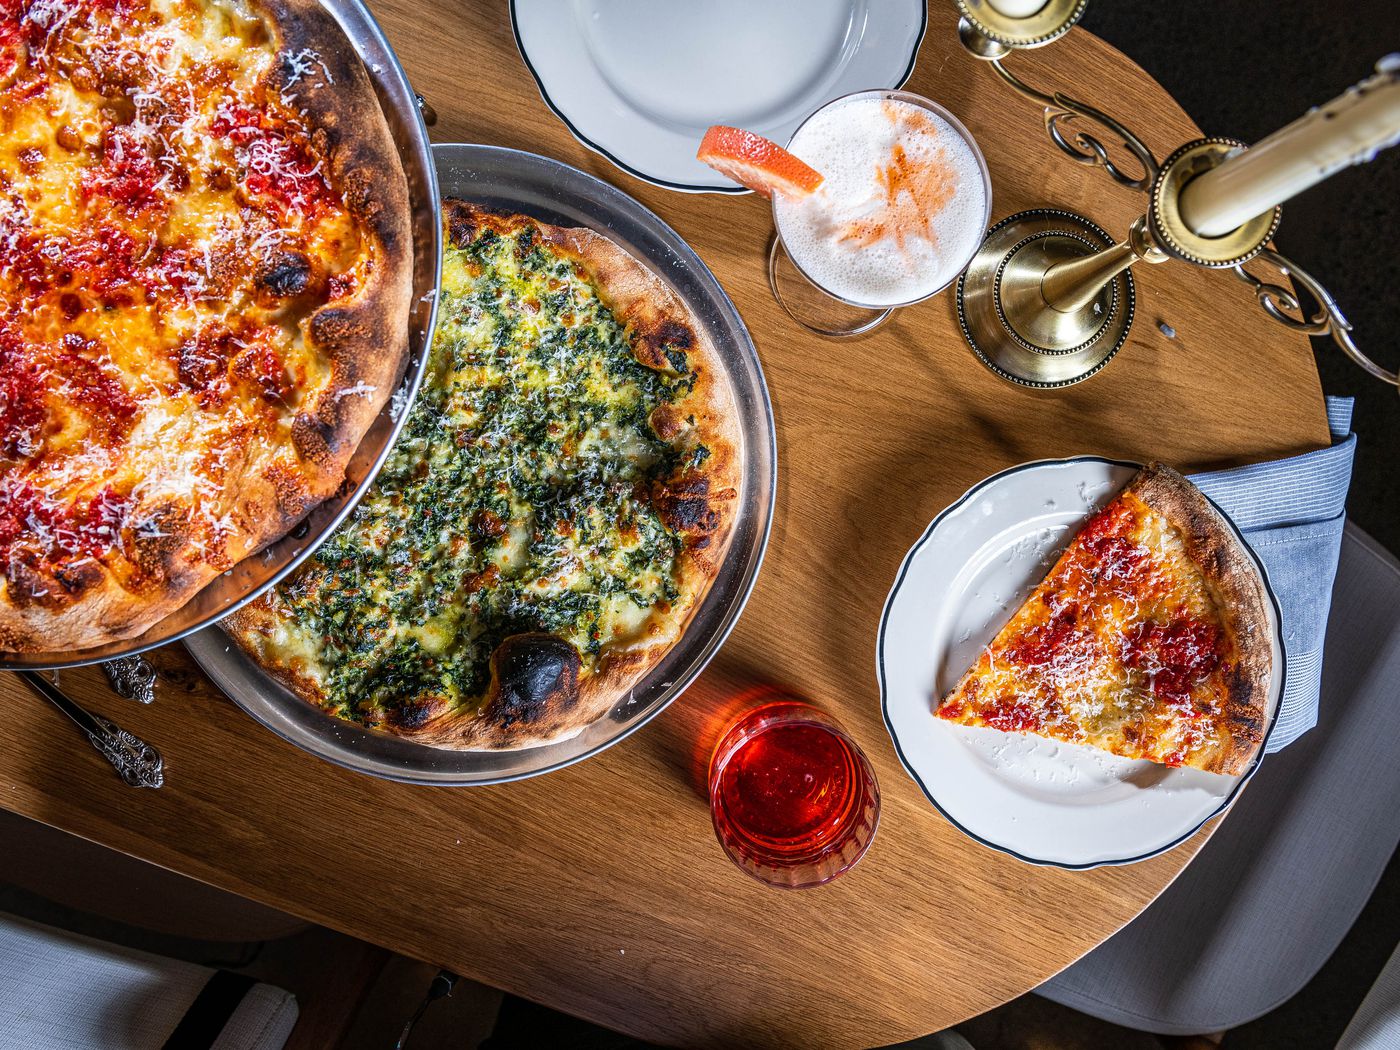 Two pizzas on a table, one with pepperoni and another with greens.